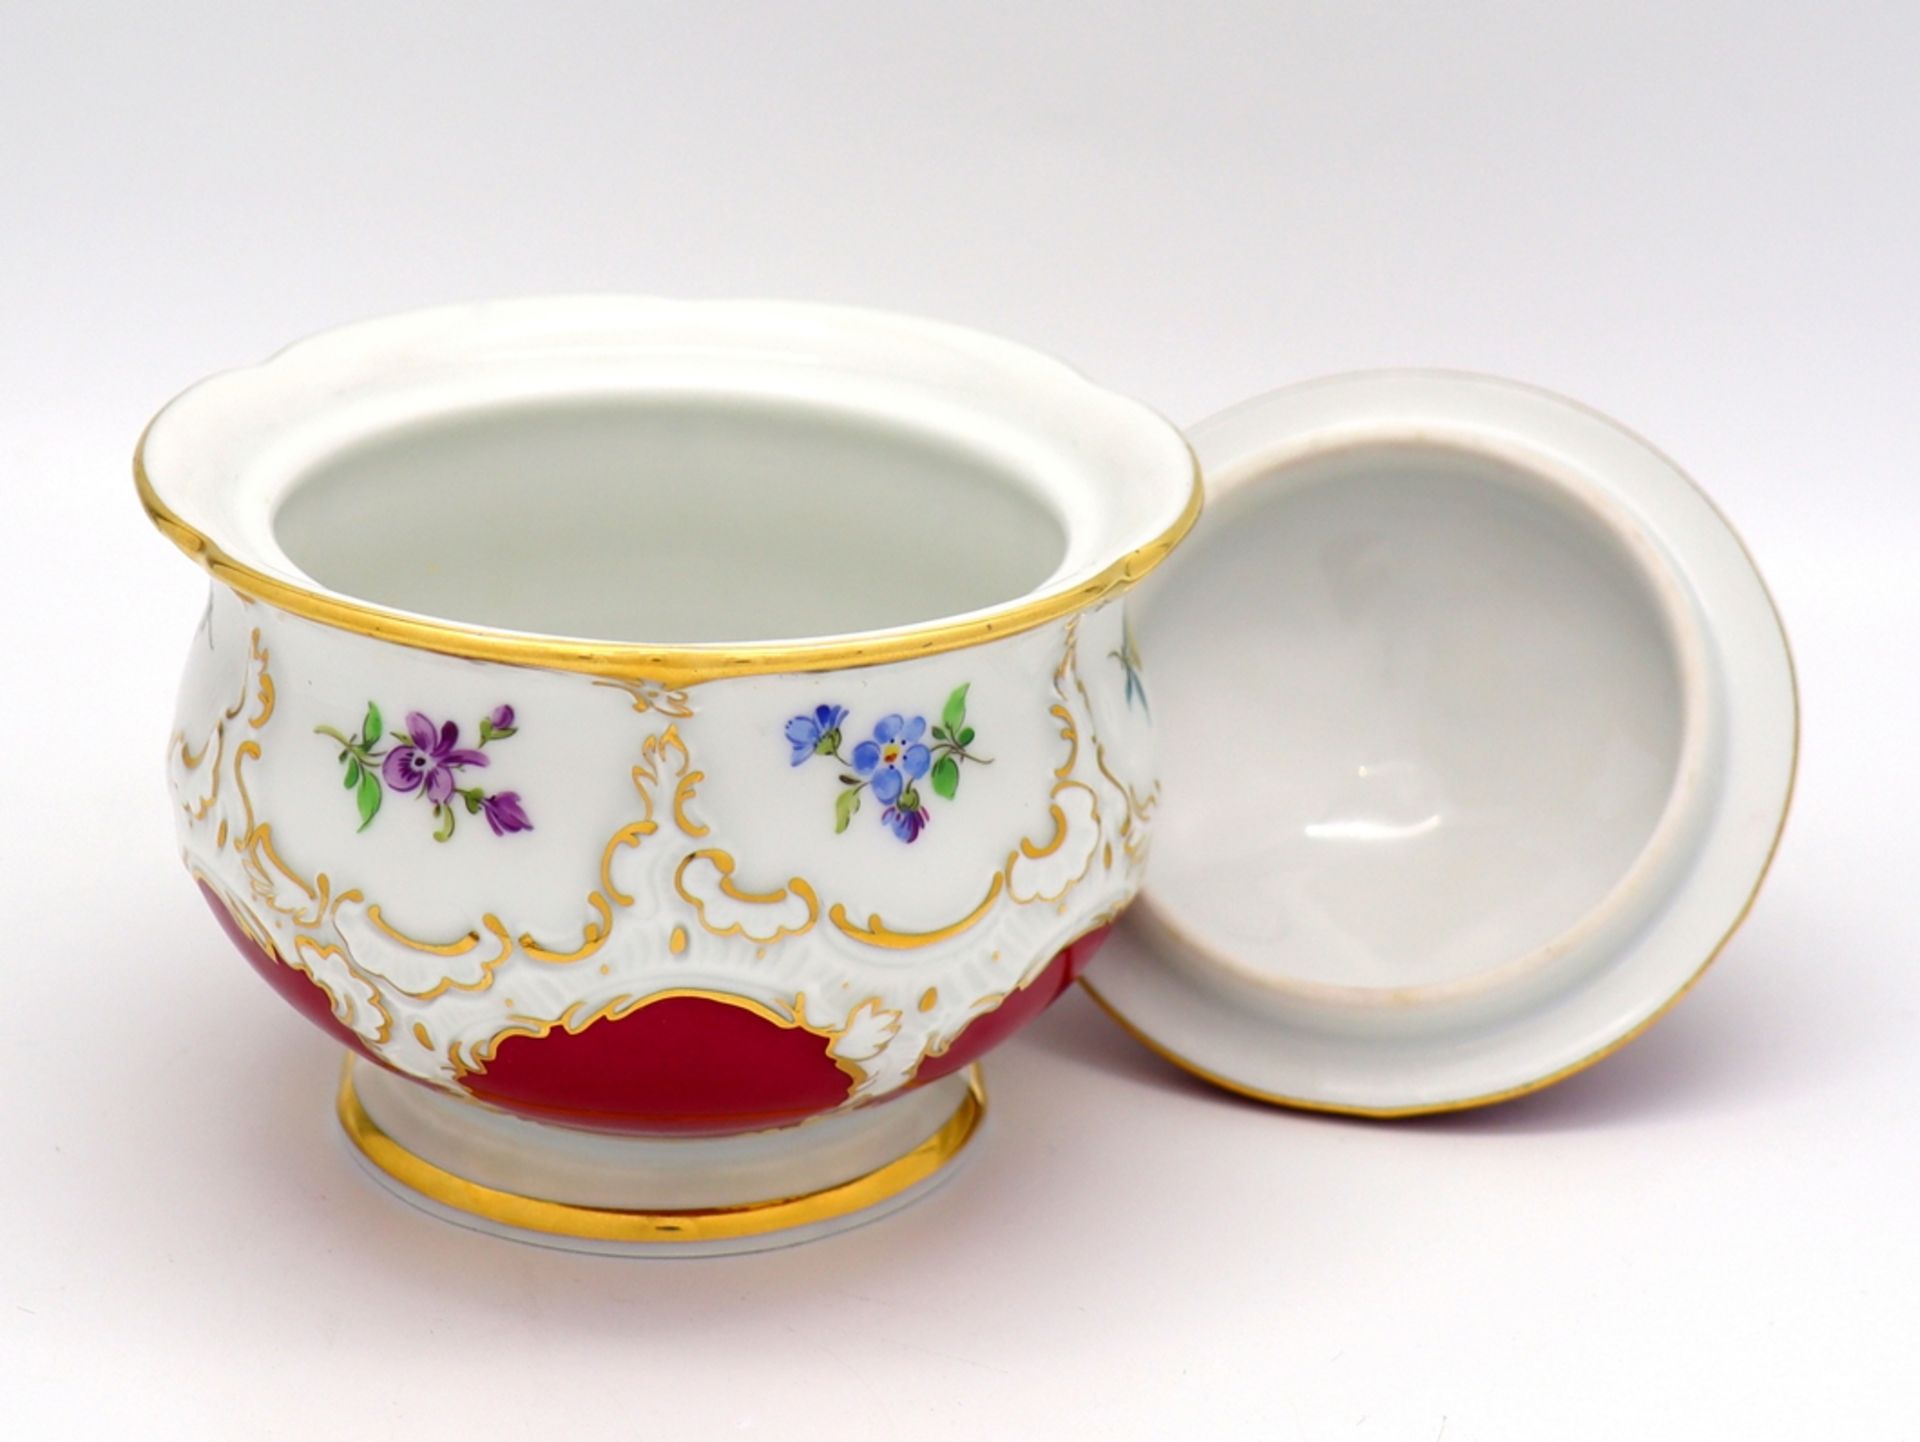 Meissen splendour sugar bowl, B-form 2nd choice in noble purple with scattered flowers, after 1945. - Image 6 of 7